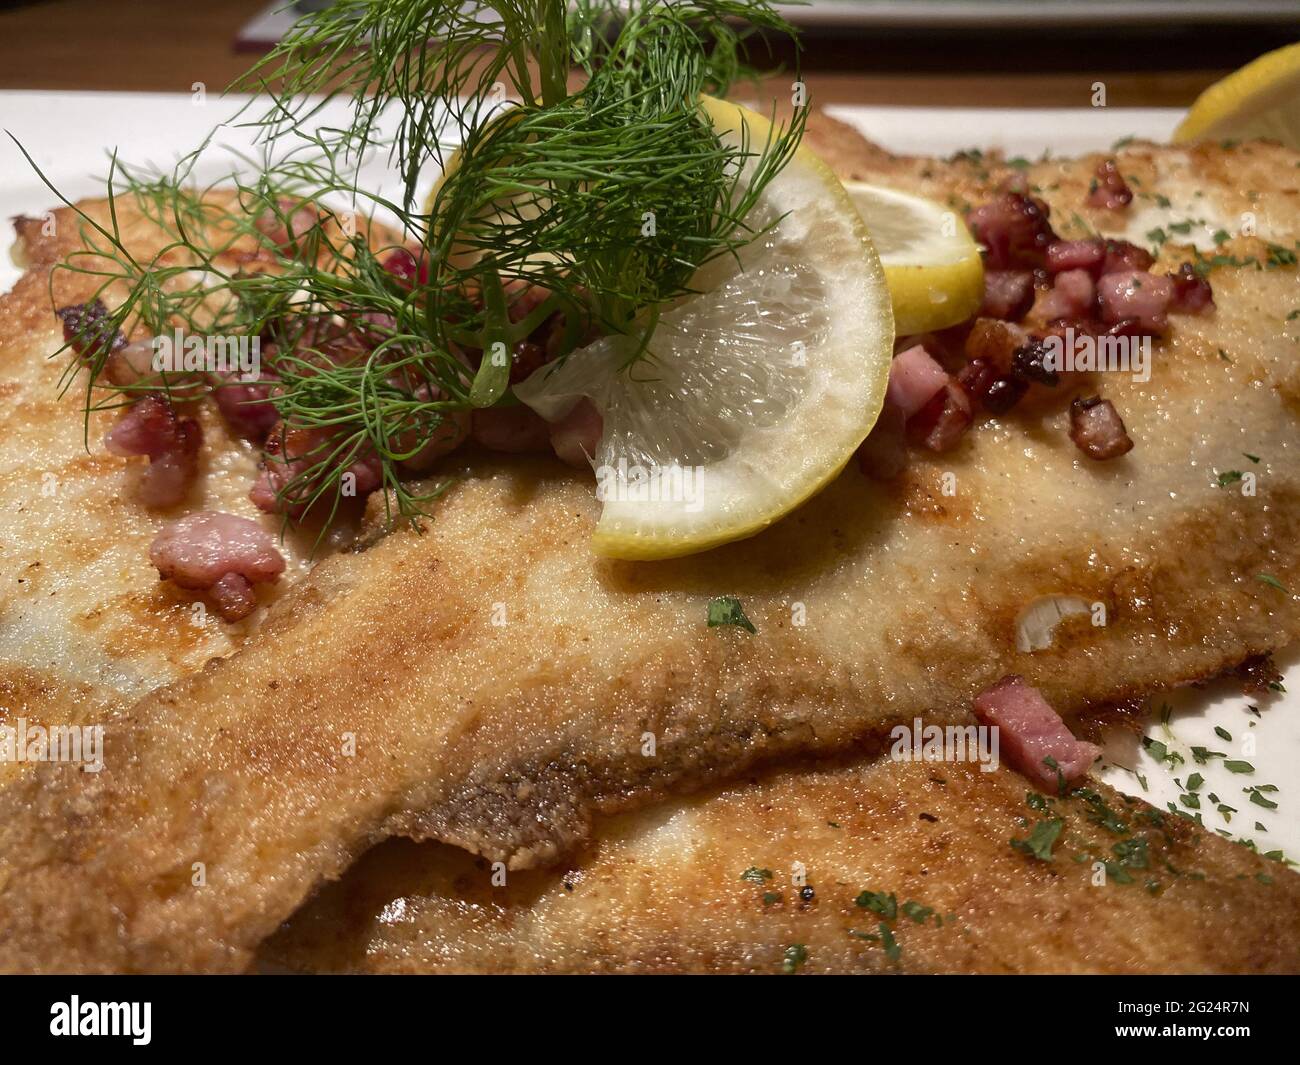 Frisch gebratene und panierte Scholle mit Speck, Zitrone und Dill.Freshly fried and breaded plaice with bacon, lemon and dill. Stock Photo